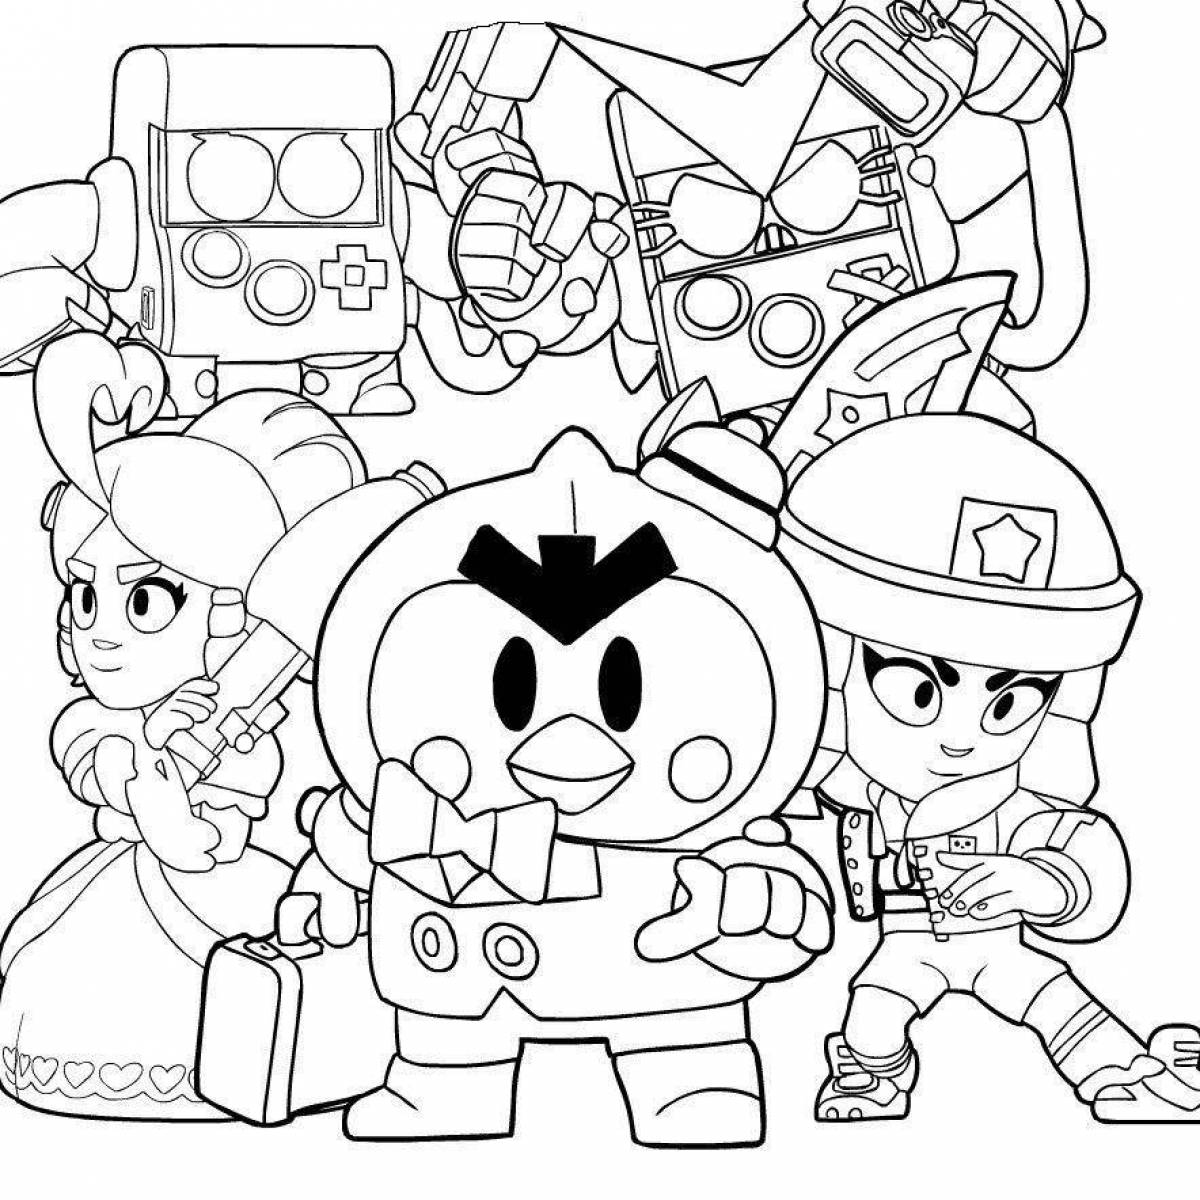 Exciting star brawl coloring page